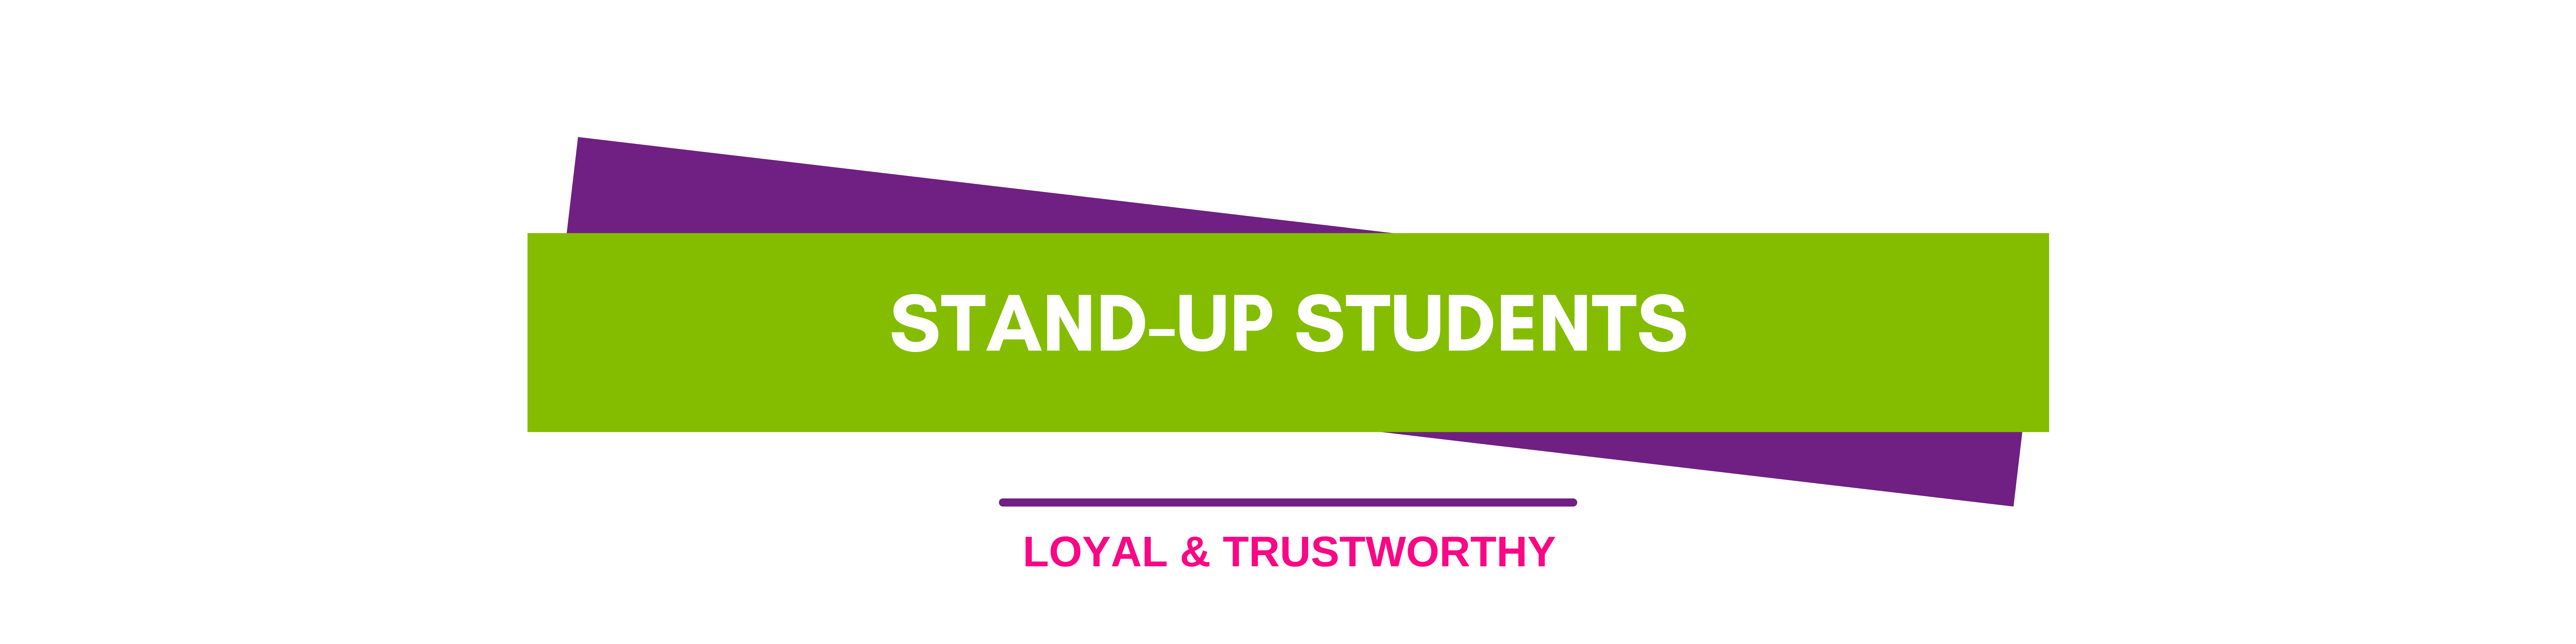 Dream-Team-Team-Stand-Up-Loyal-Students-Title-Banner-Assuaged